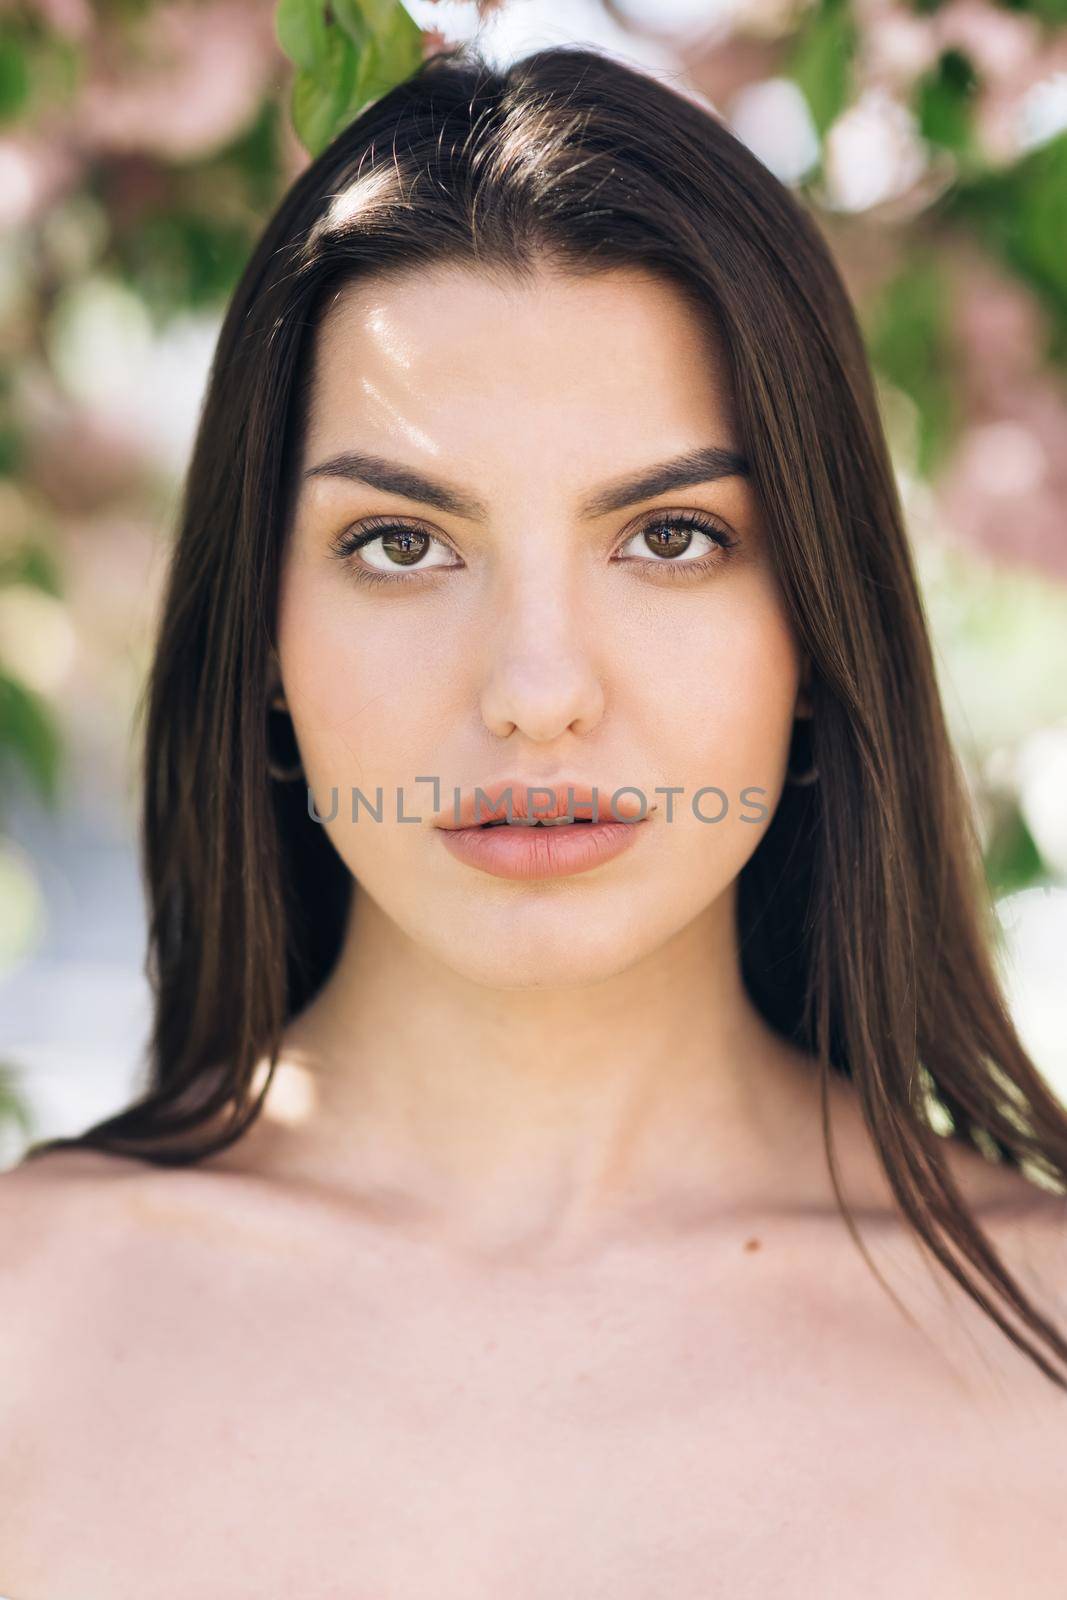 Glamour portrait of beautiful woman model with fresh daily makeup and romantic wavy hairstyle. Fashion shiny highlighter on skin, sexy gloss lips make-up and dark eyebrows.